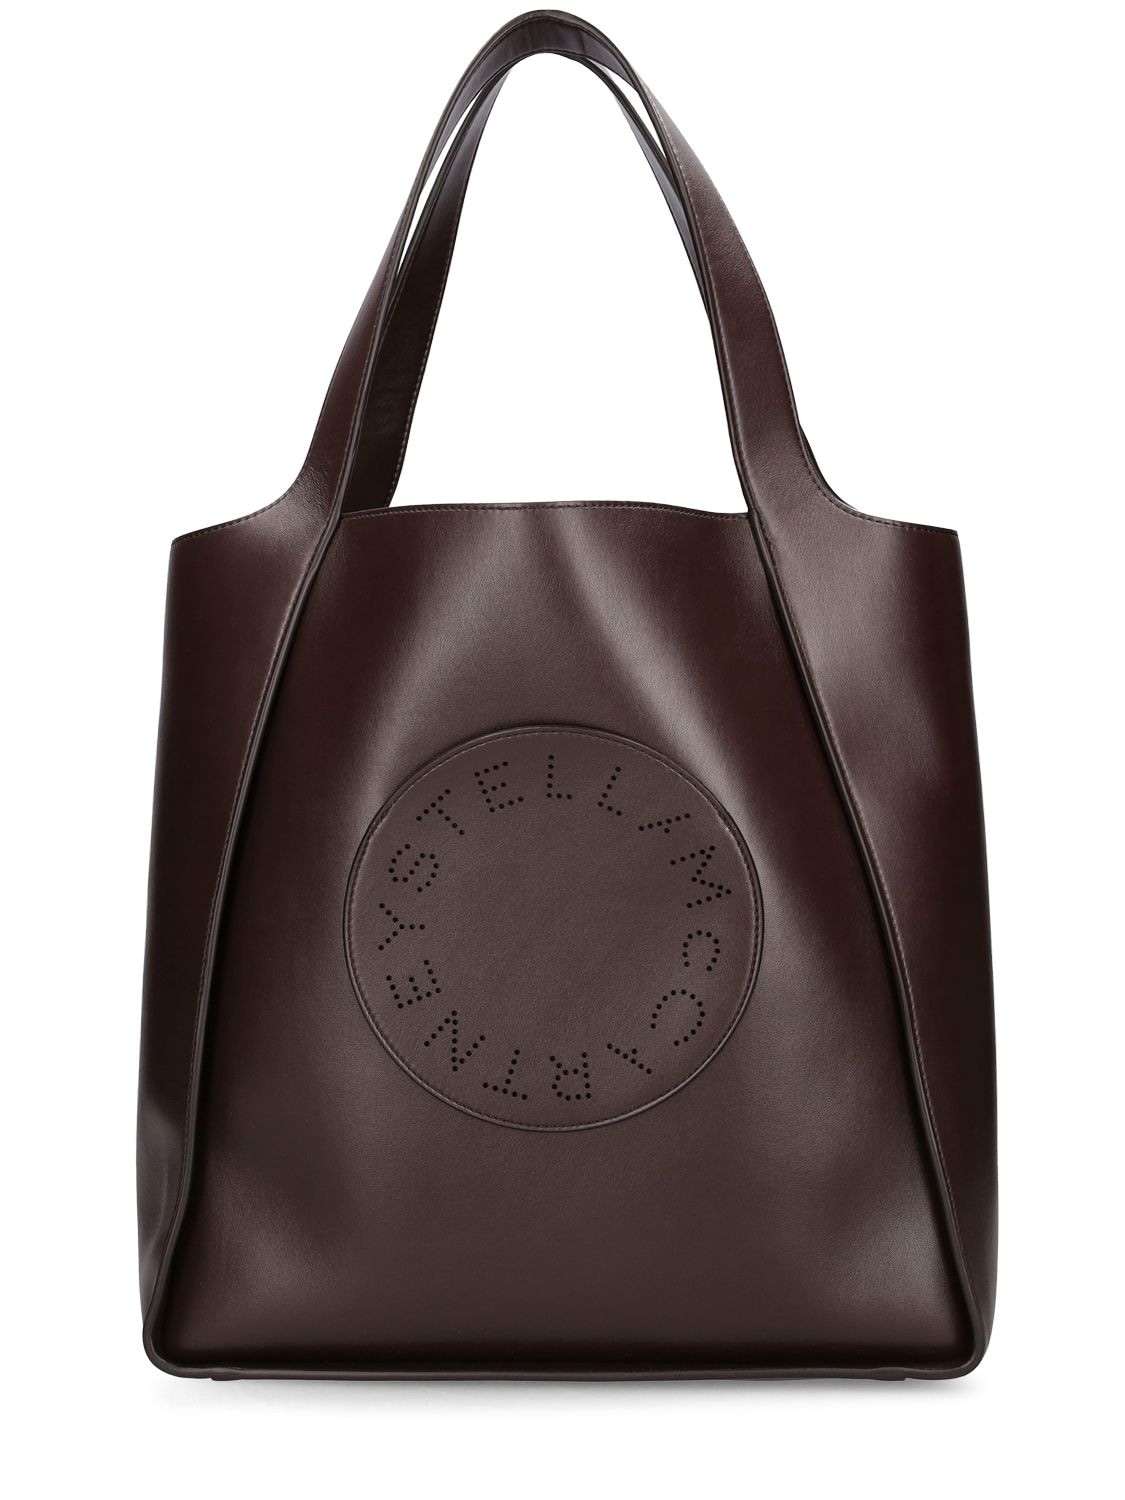 Alter Mat Faux Leather Tote Bag image